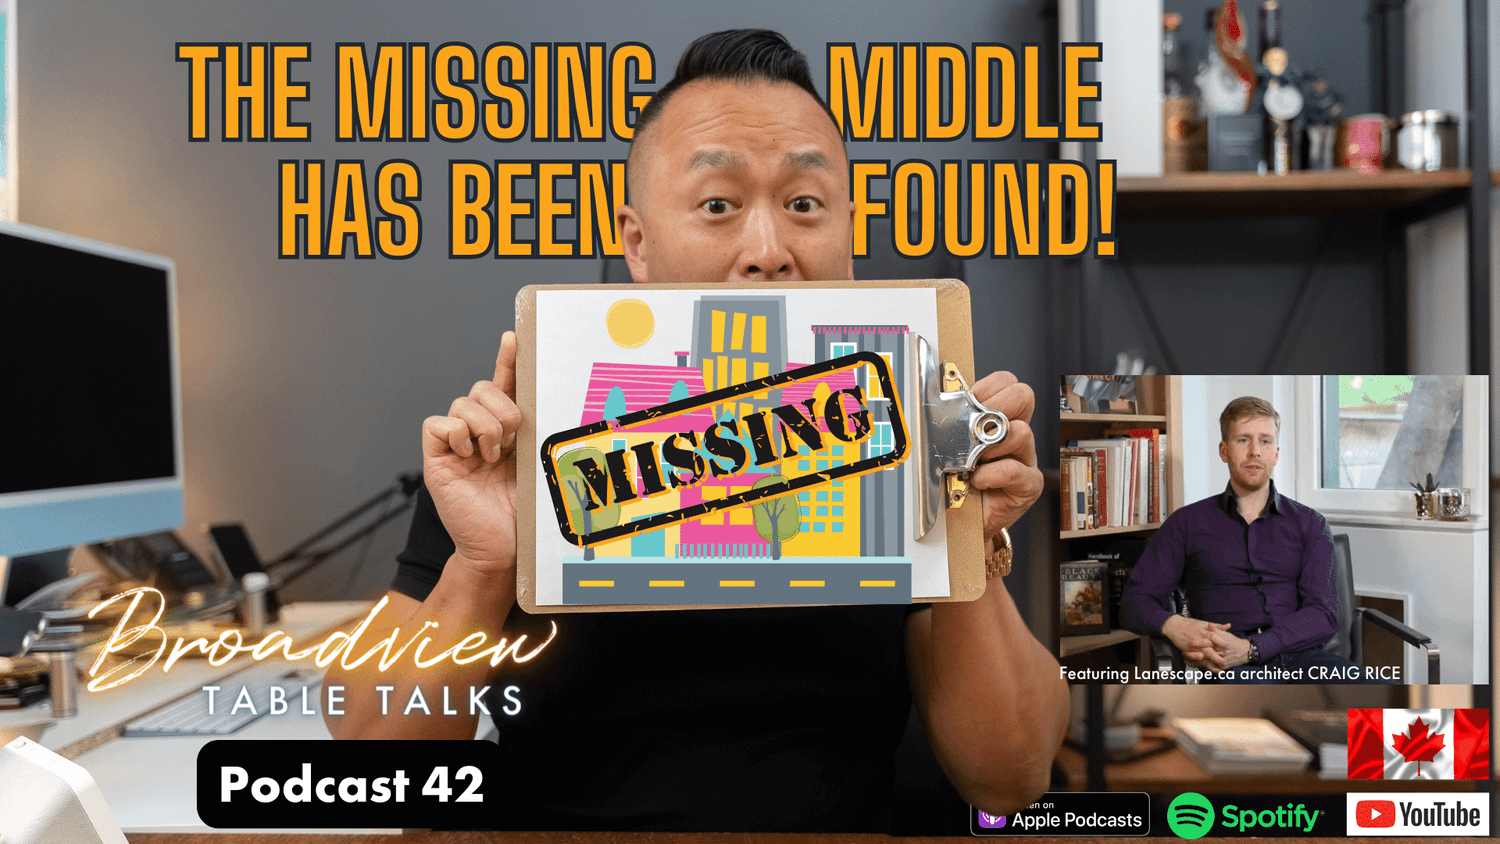 Podcast feature: The Missing Middle has been found! | Craig Race